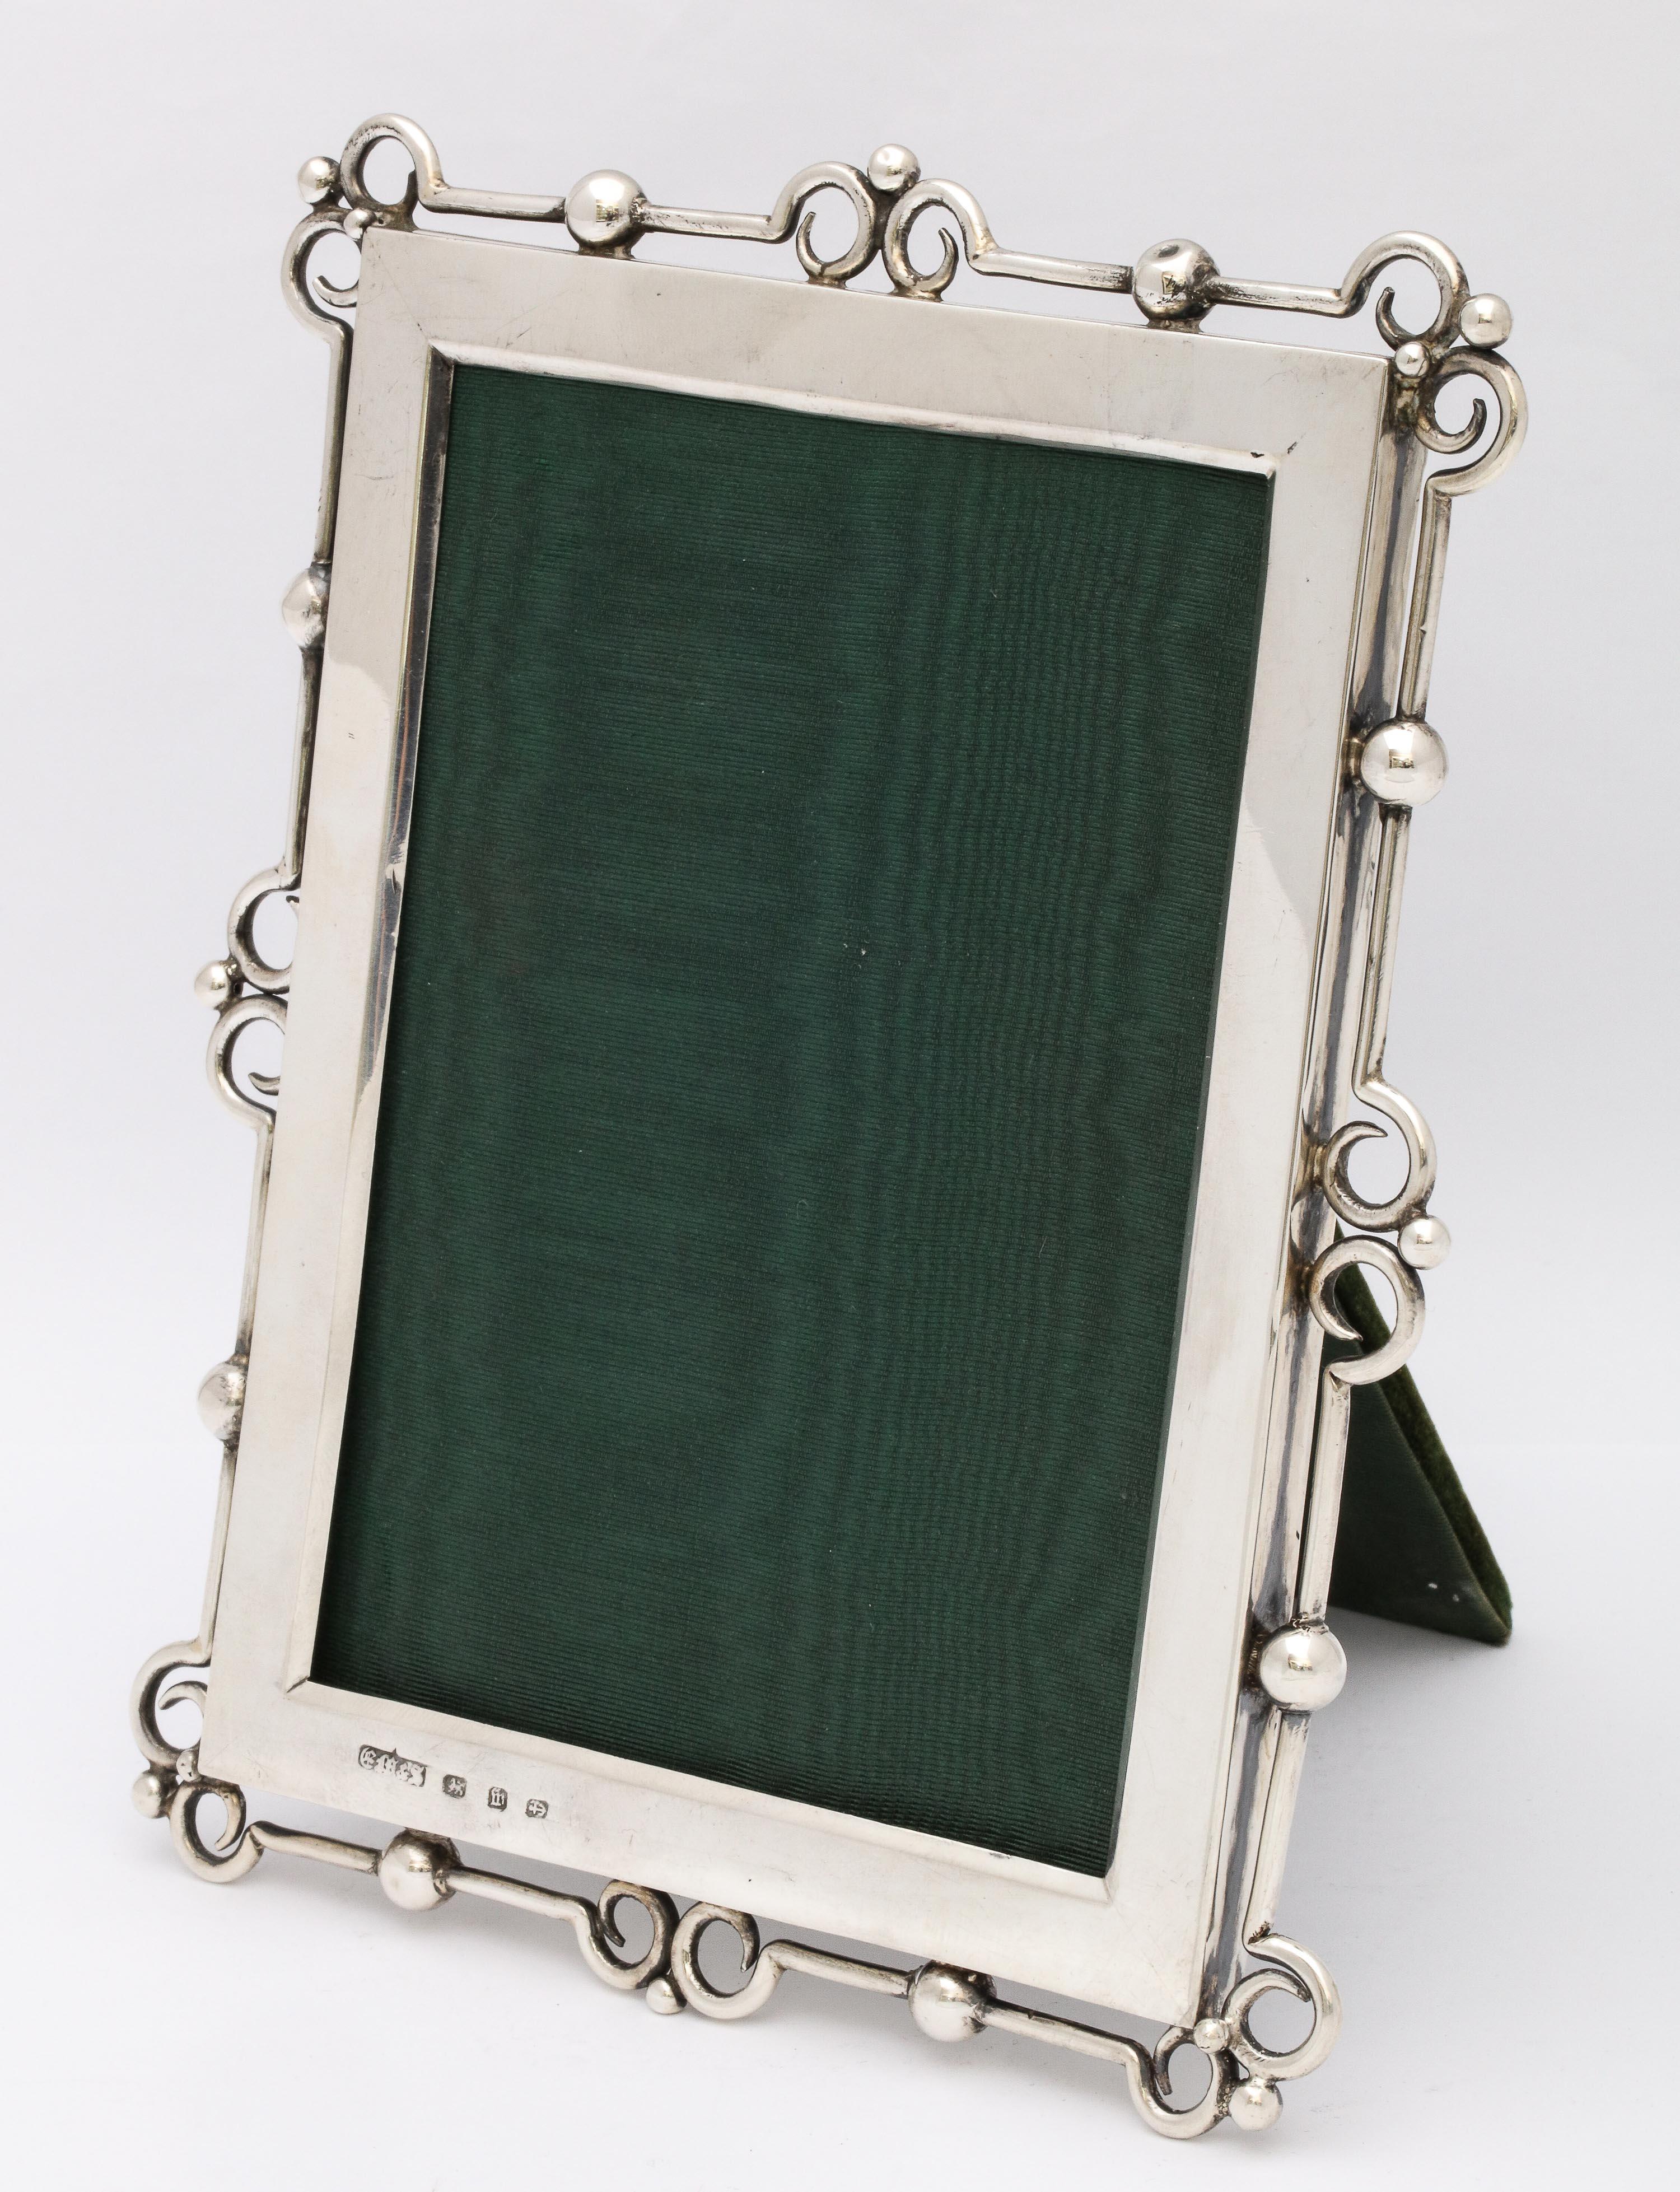 Unusual, Arts & Crafts, sterling silver picture frame, Birmingham, England, year hallmarked for 1896, E. Mander and Sons - makers. Velvet back. Measures: 7 1/4 inches high x 5 3/4 inches wide x 4 3/4 inches deep (when easel is in open position).